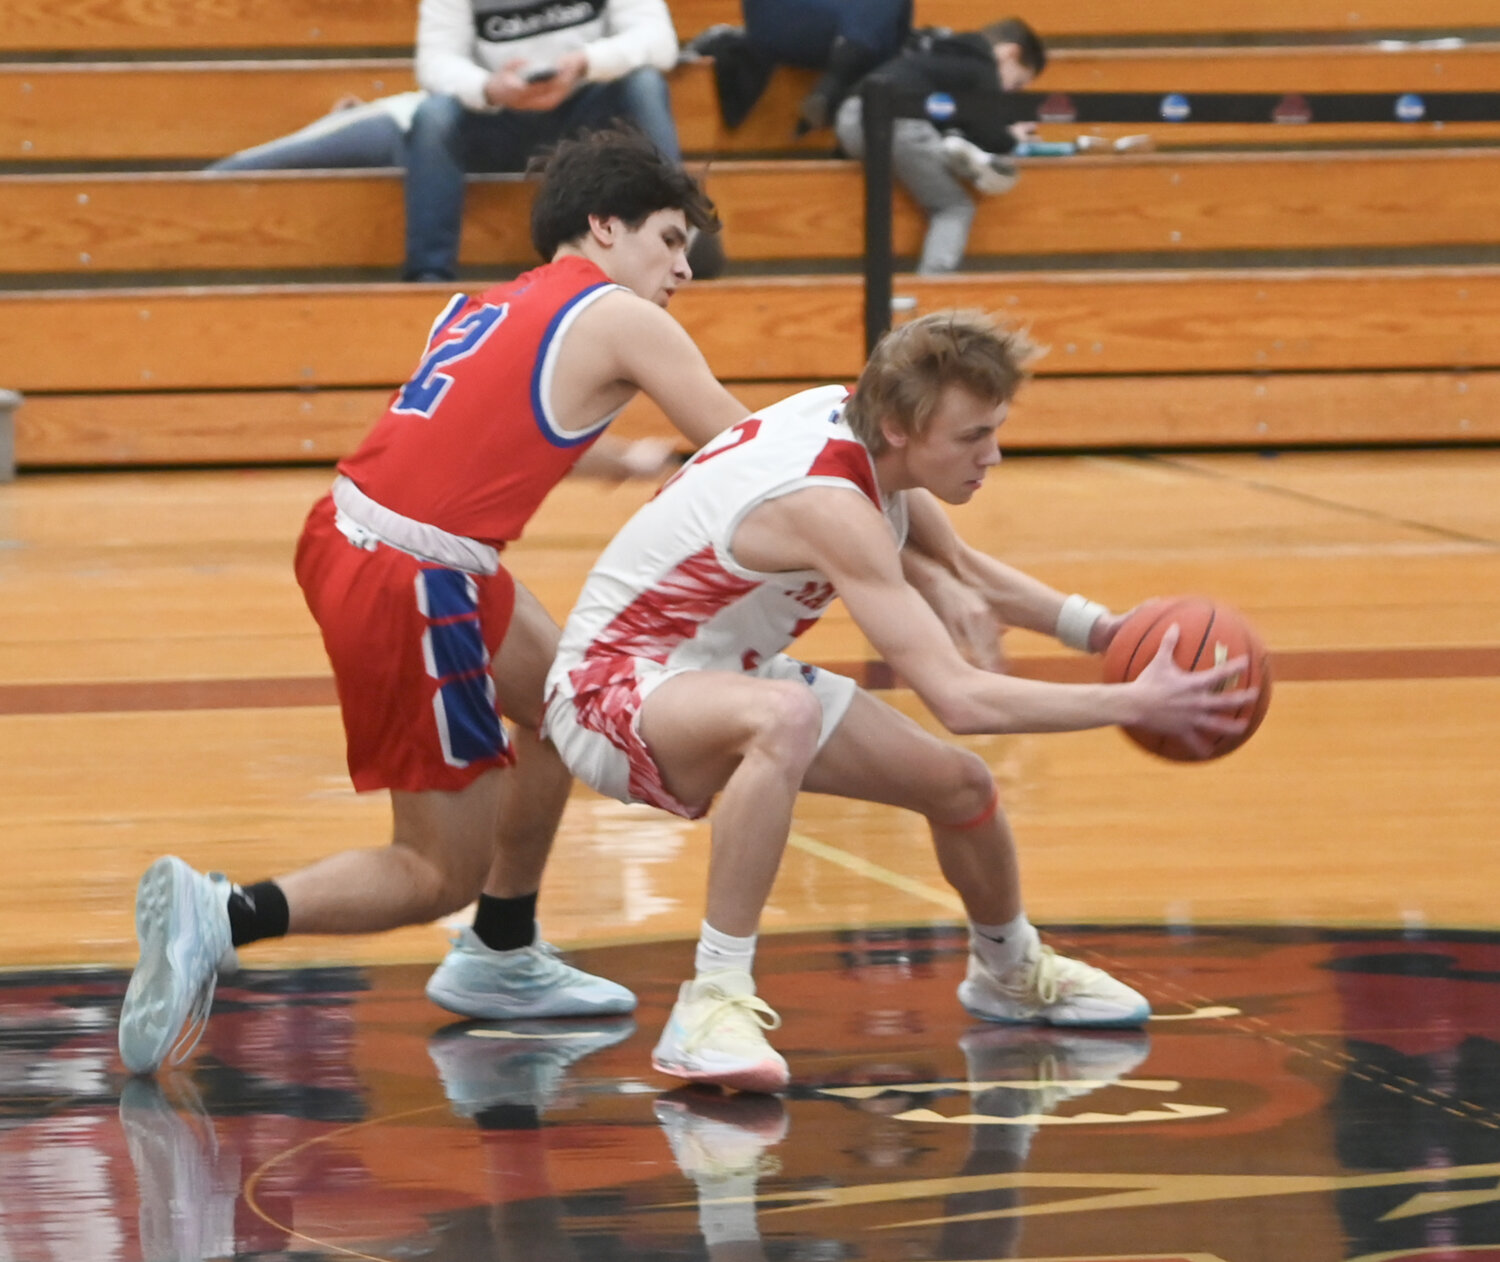 New Hartford's Sal Weller Jr. tries to steal the ball against a Massena player in the state Class A regional final on Saturday at SUNY Potsdam.